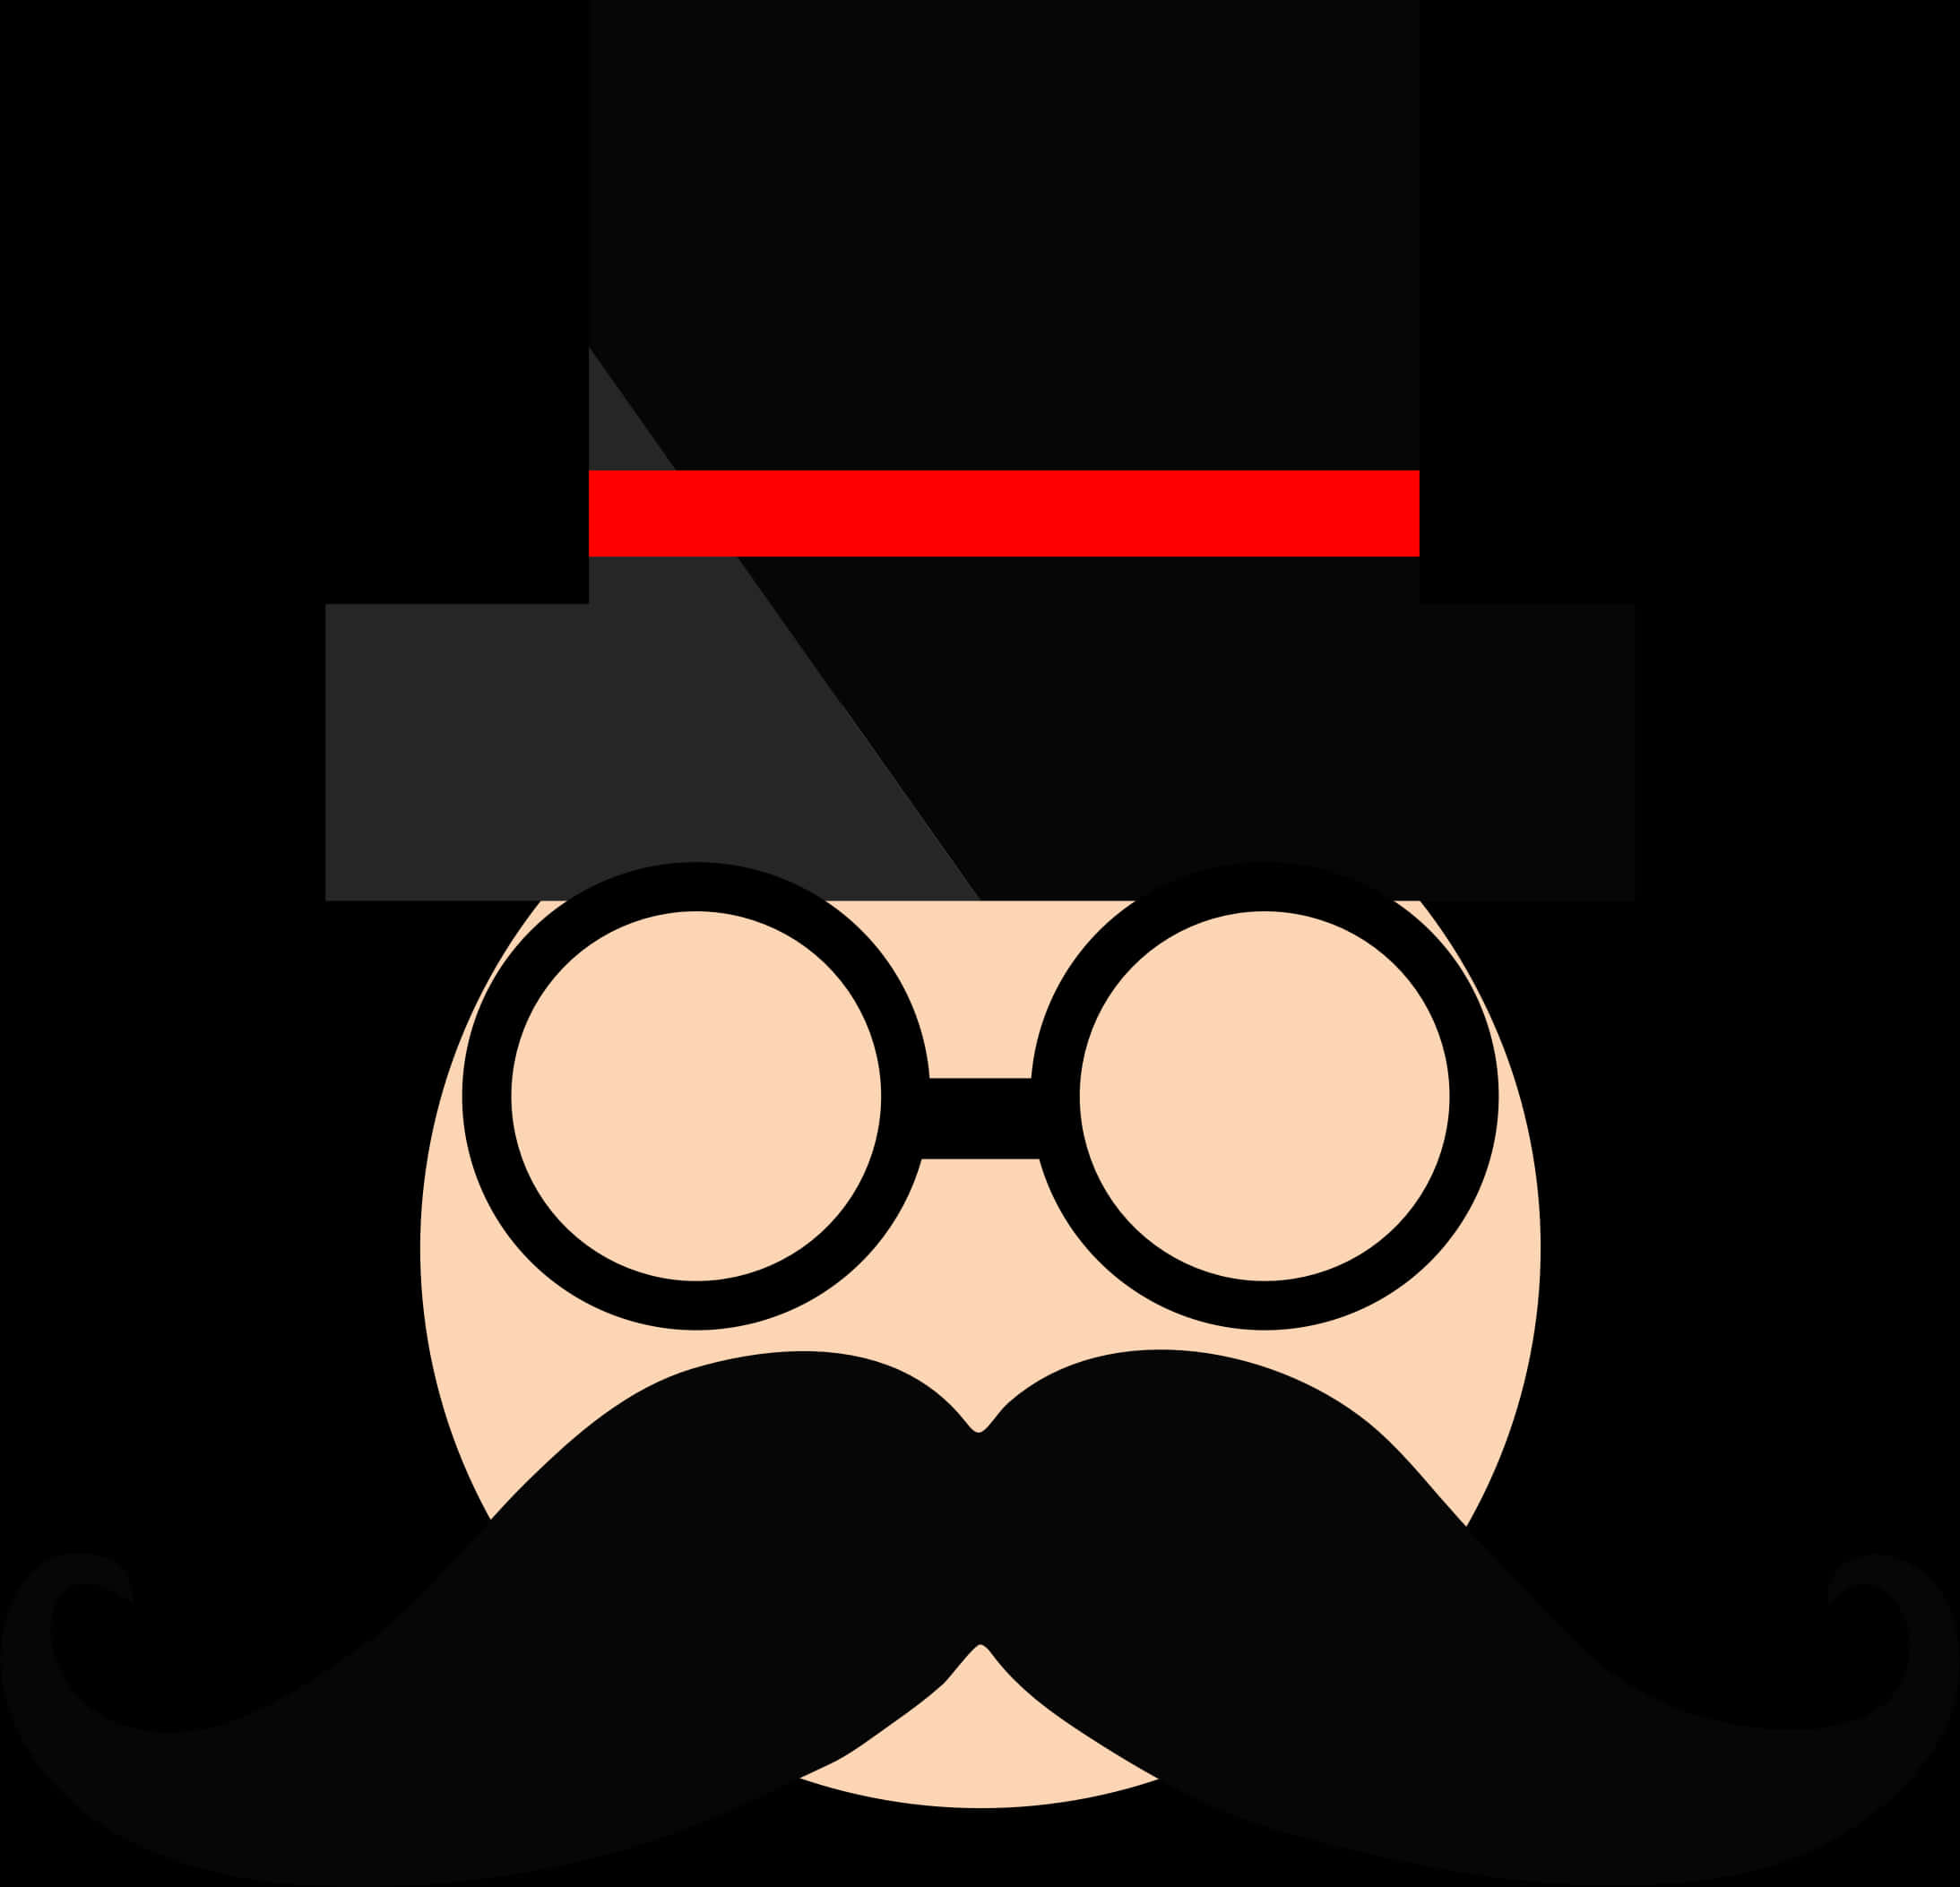 A Cartoon Of A Man With A Mustache And Glasses